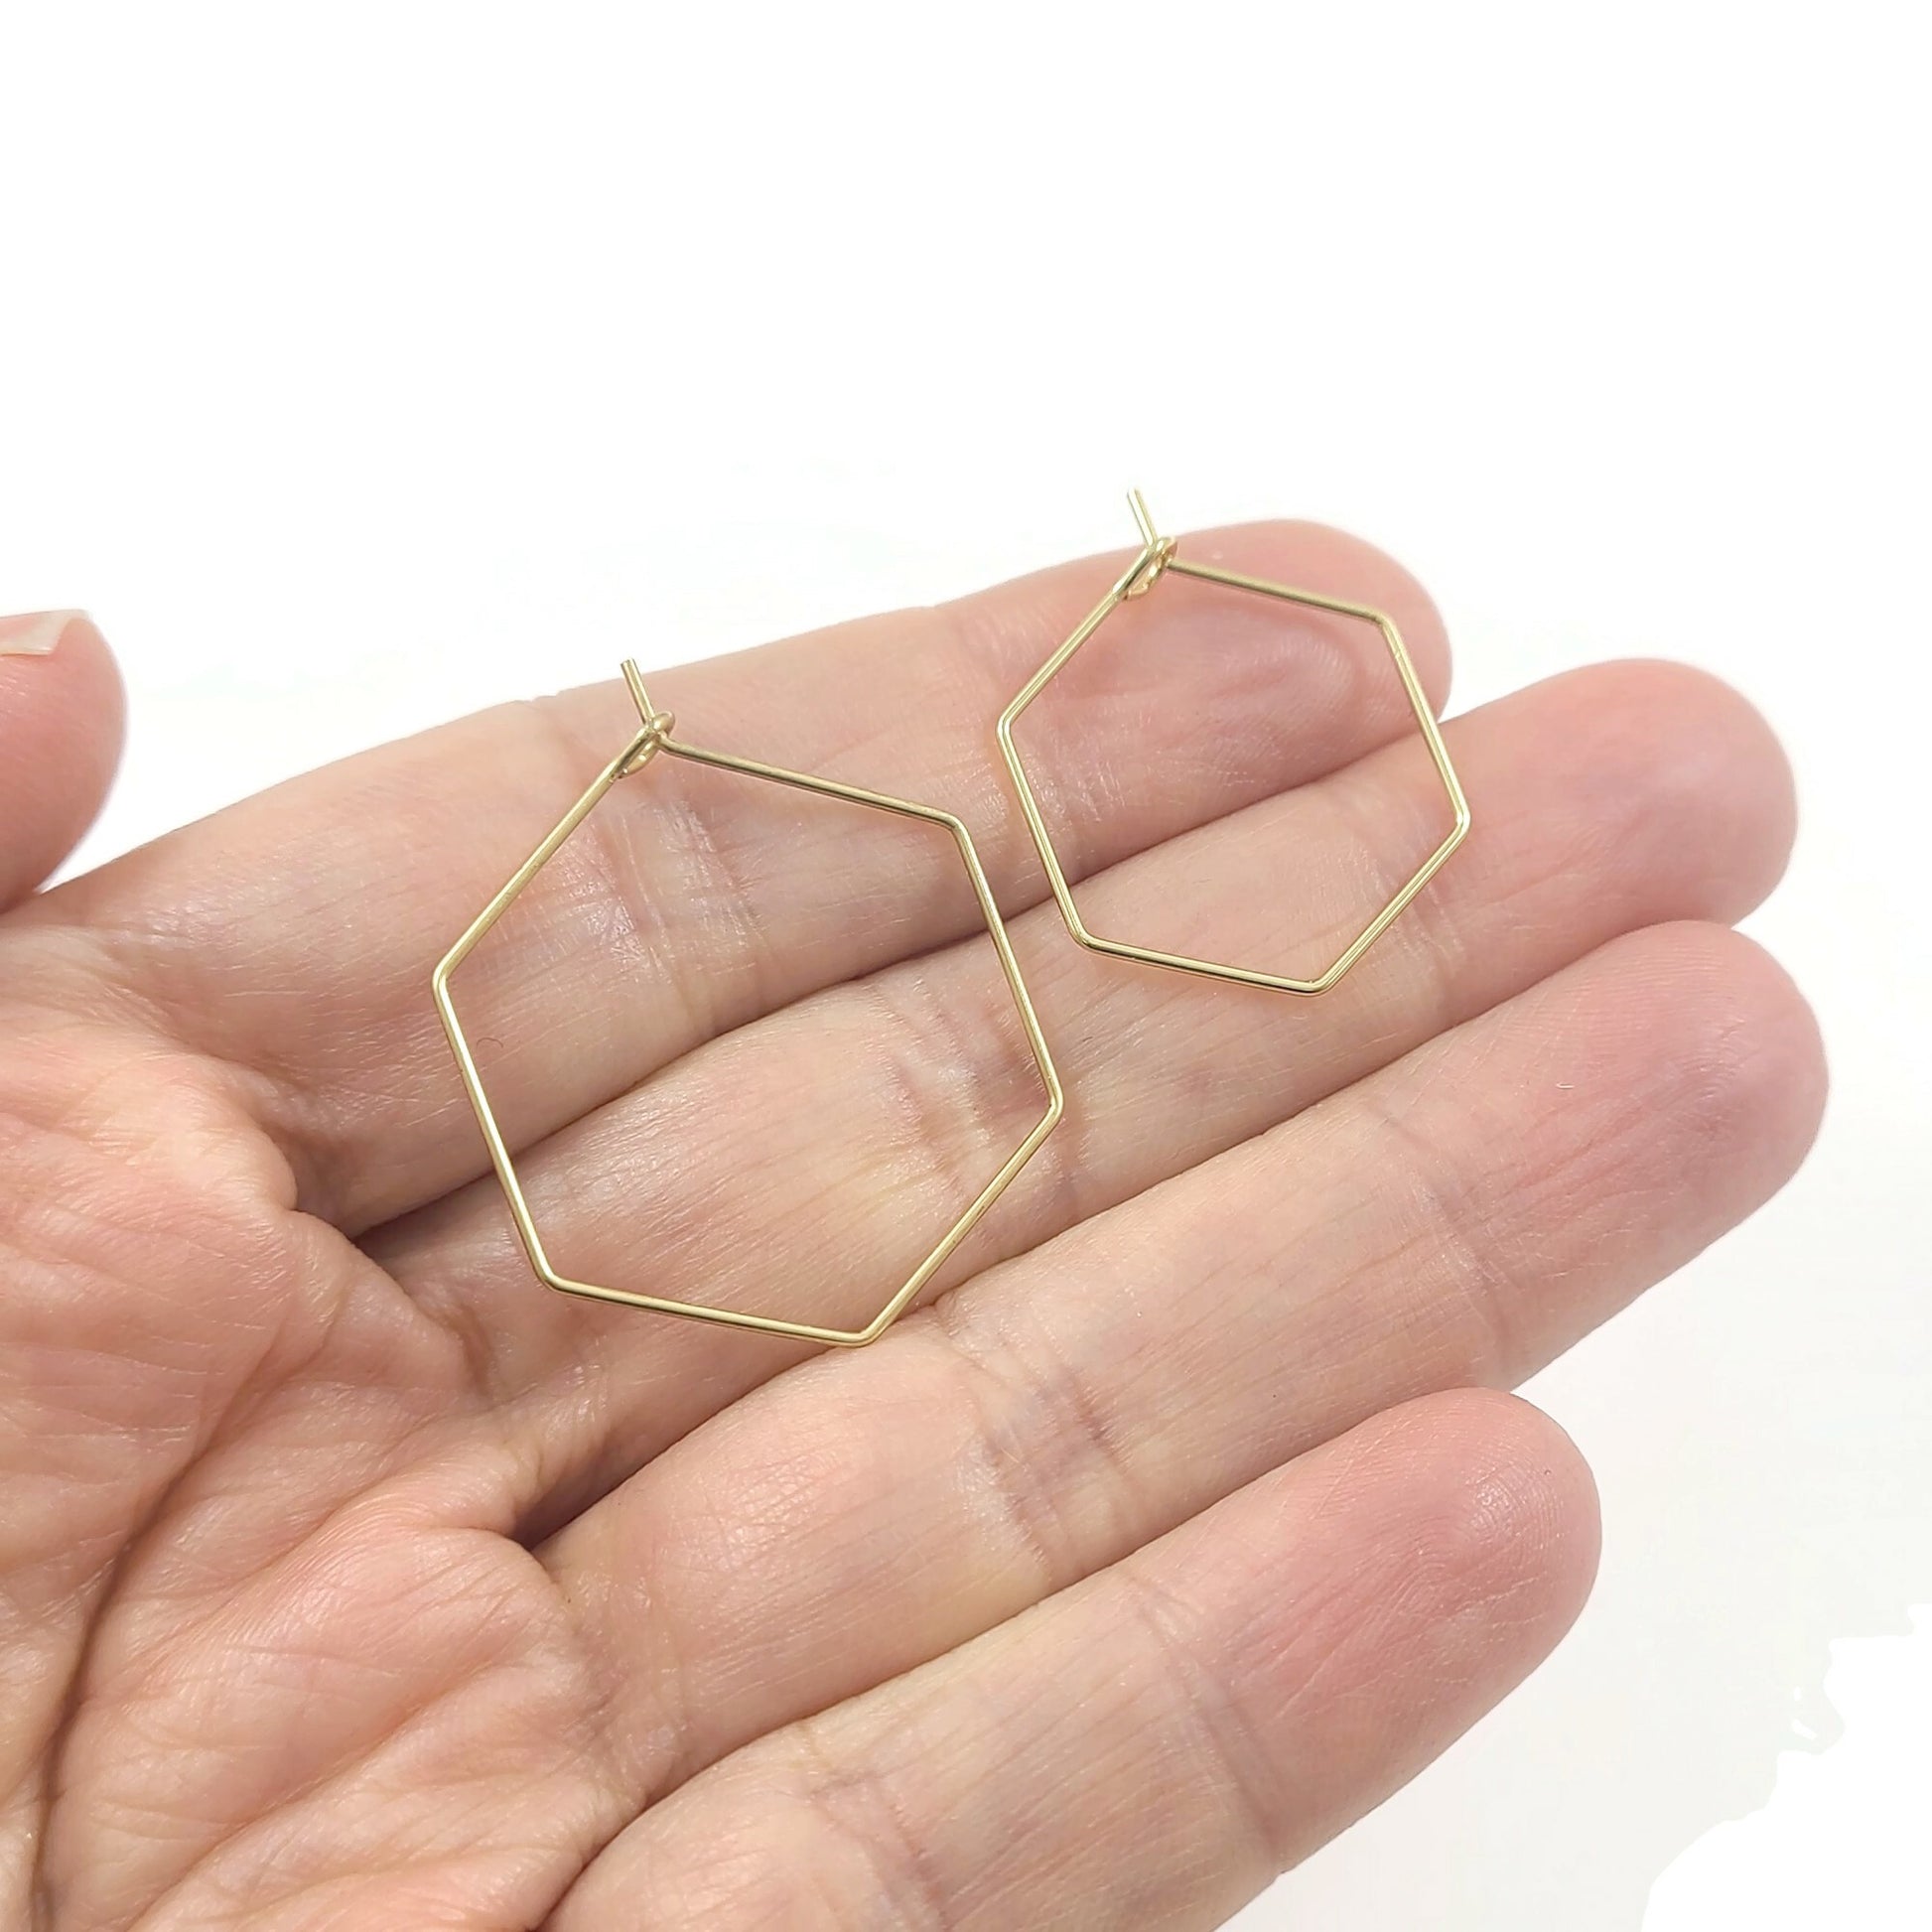 Gold stainless steel hexagon hoops 10pcs (5 pairs) - 2 size available